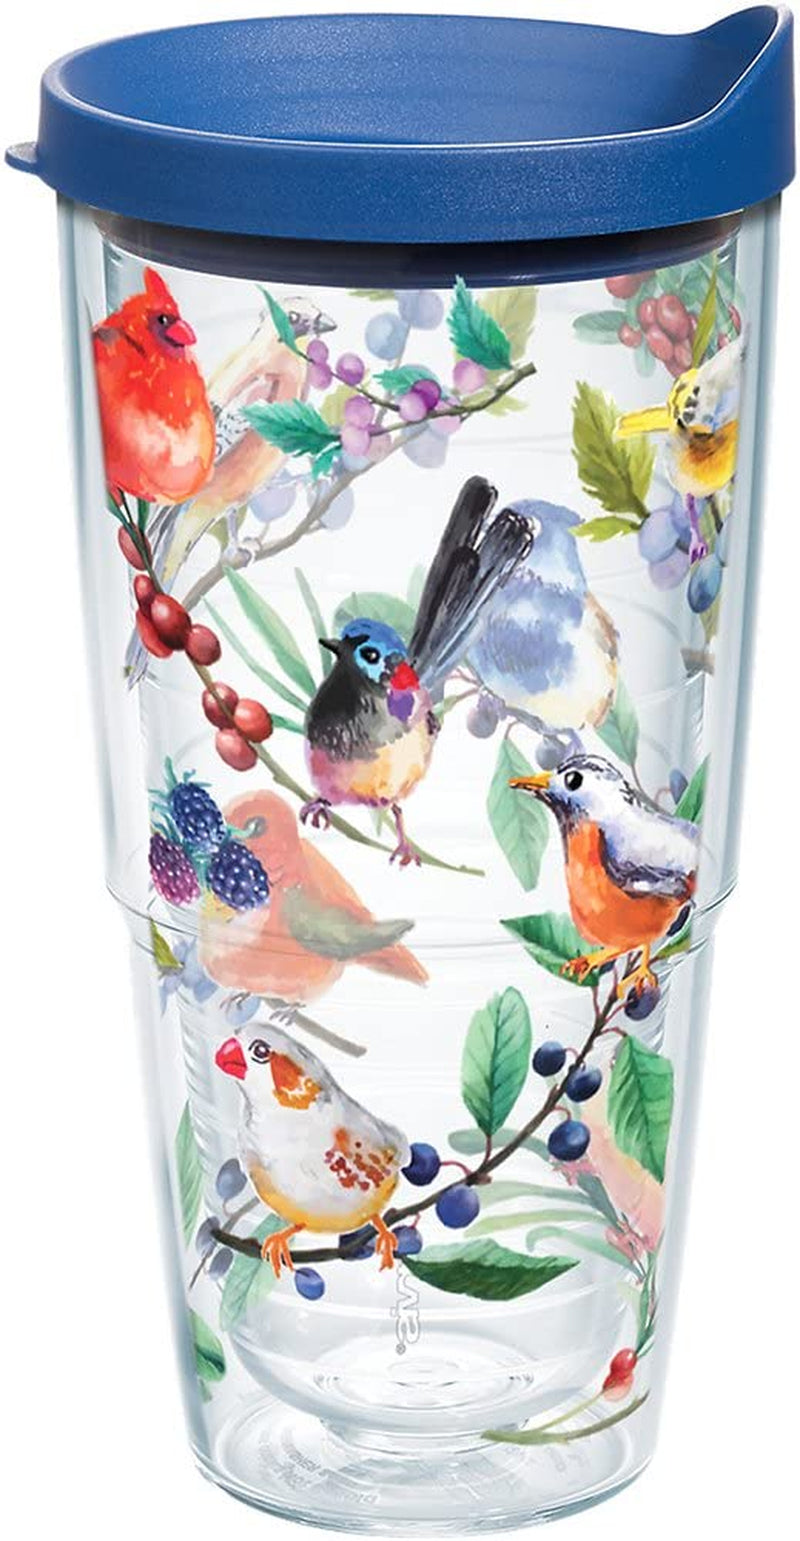 Tervis Watercolor Songbirds Made in USA Double Walled Insulated Tumbler Cup Keeps Drinks Cold & Hot, 24Oz, Clear